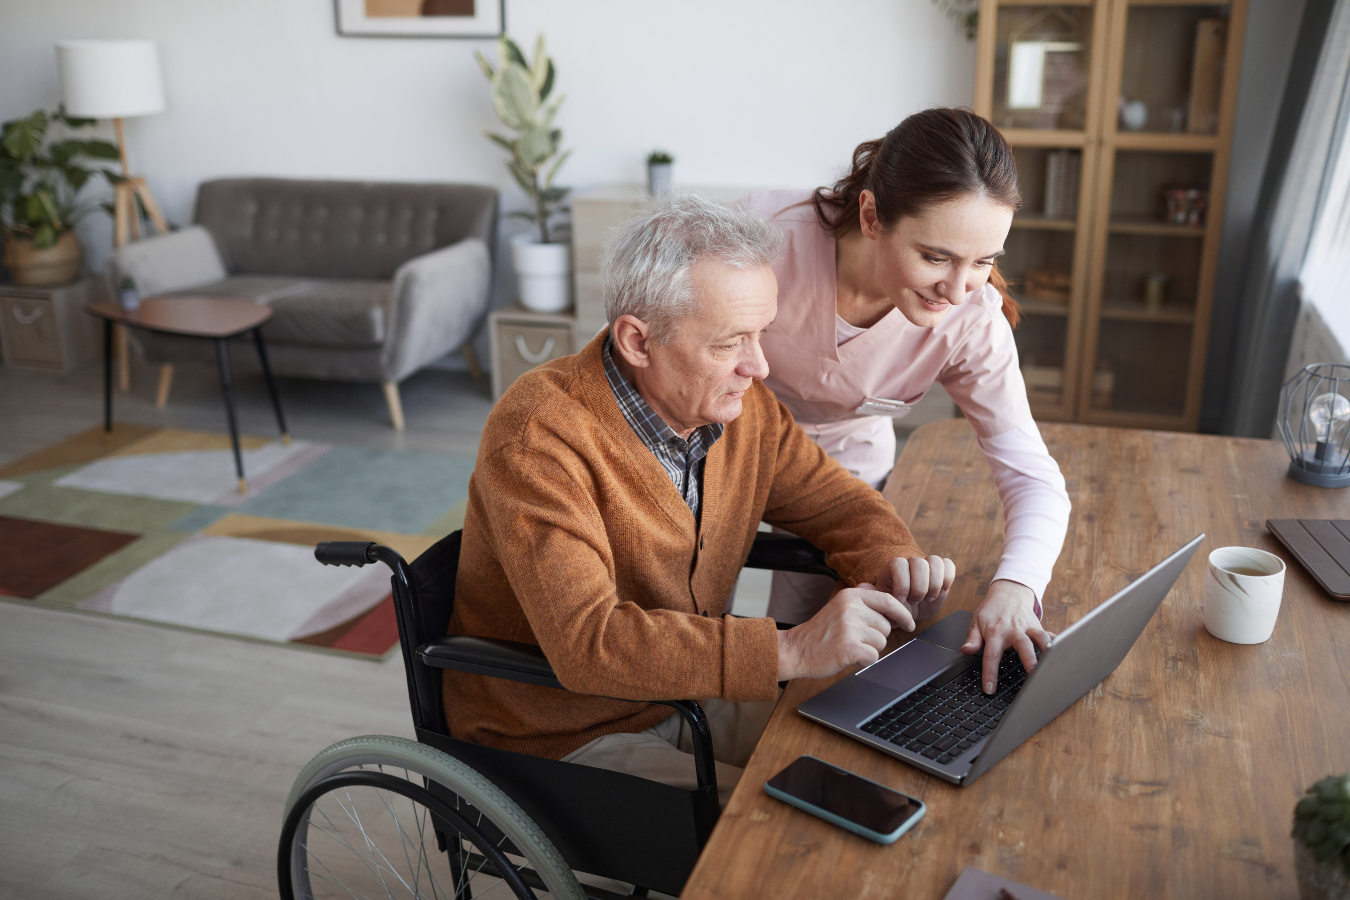 A female nurse helps an older man in a wheelchair work on his computer. ERP solutions can integrate tools like PowerBI to help health and human services to do what they do best - focus on their patients and clientele.